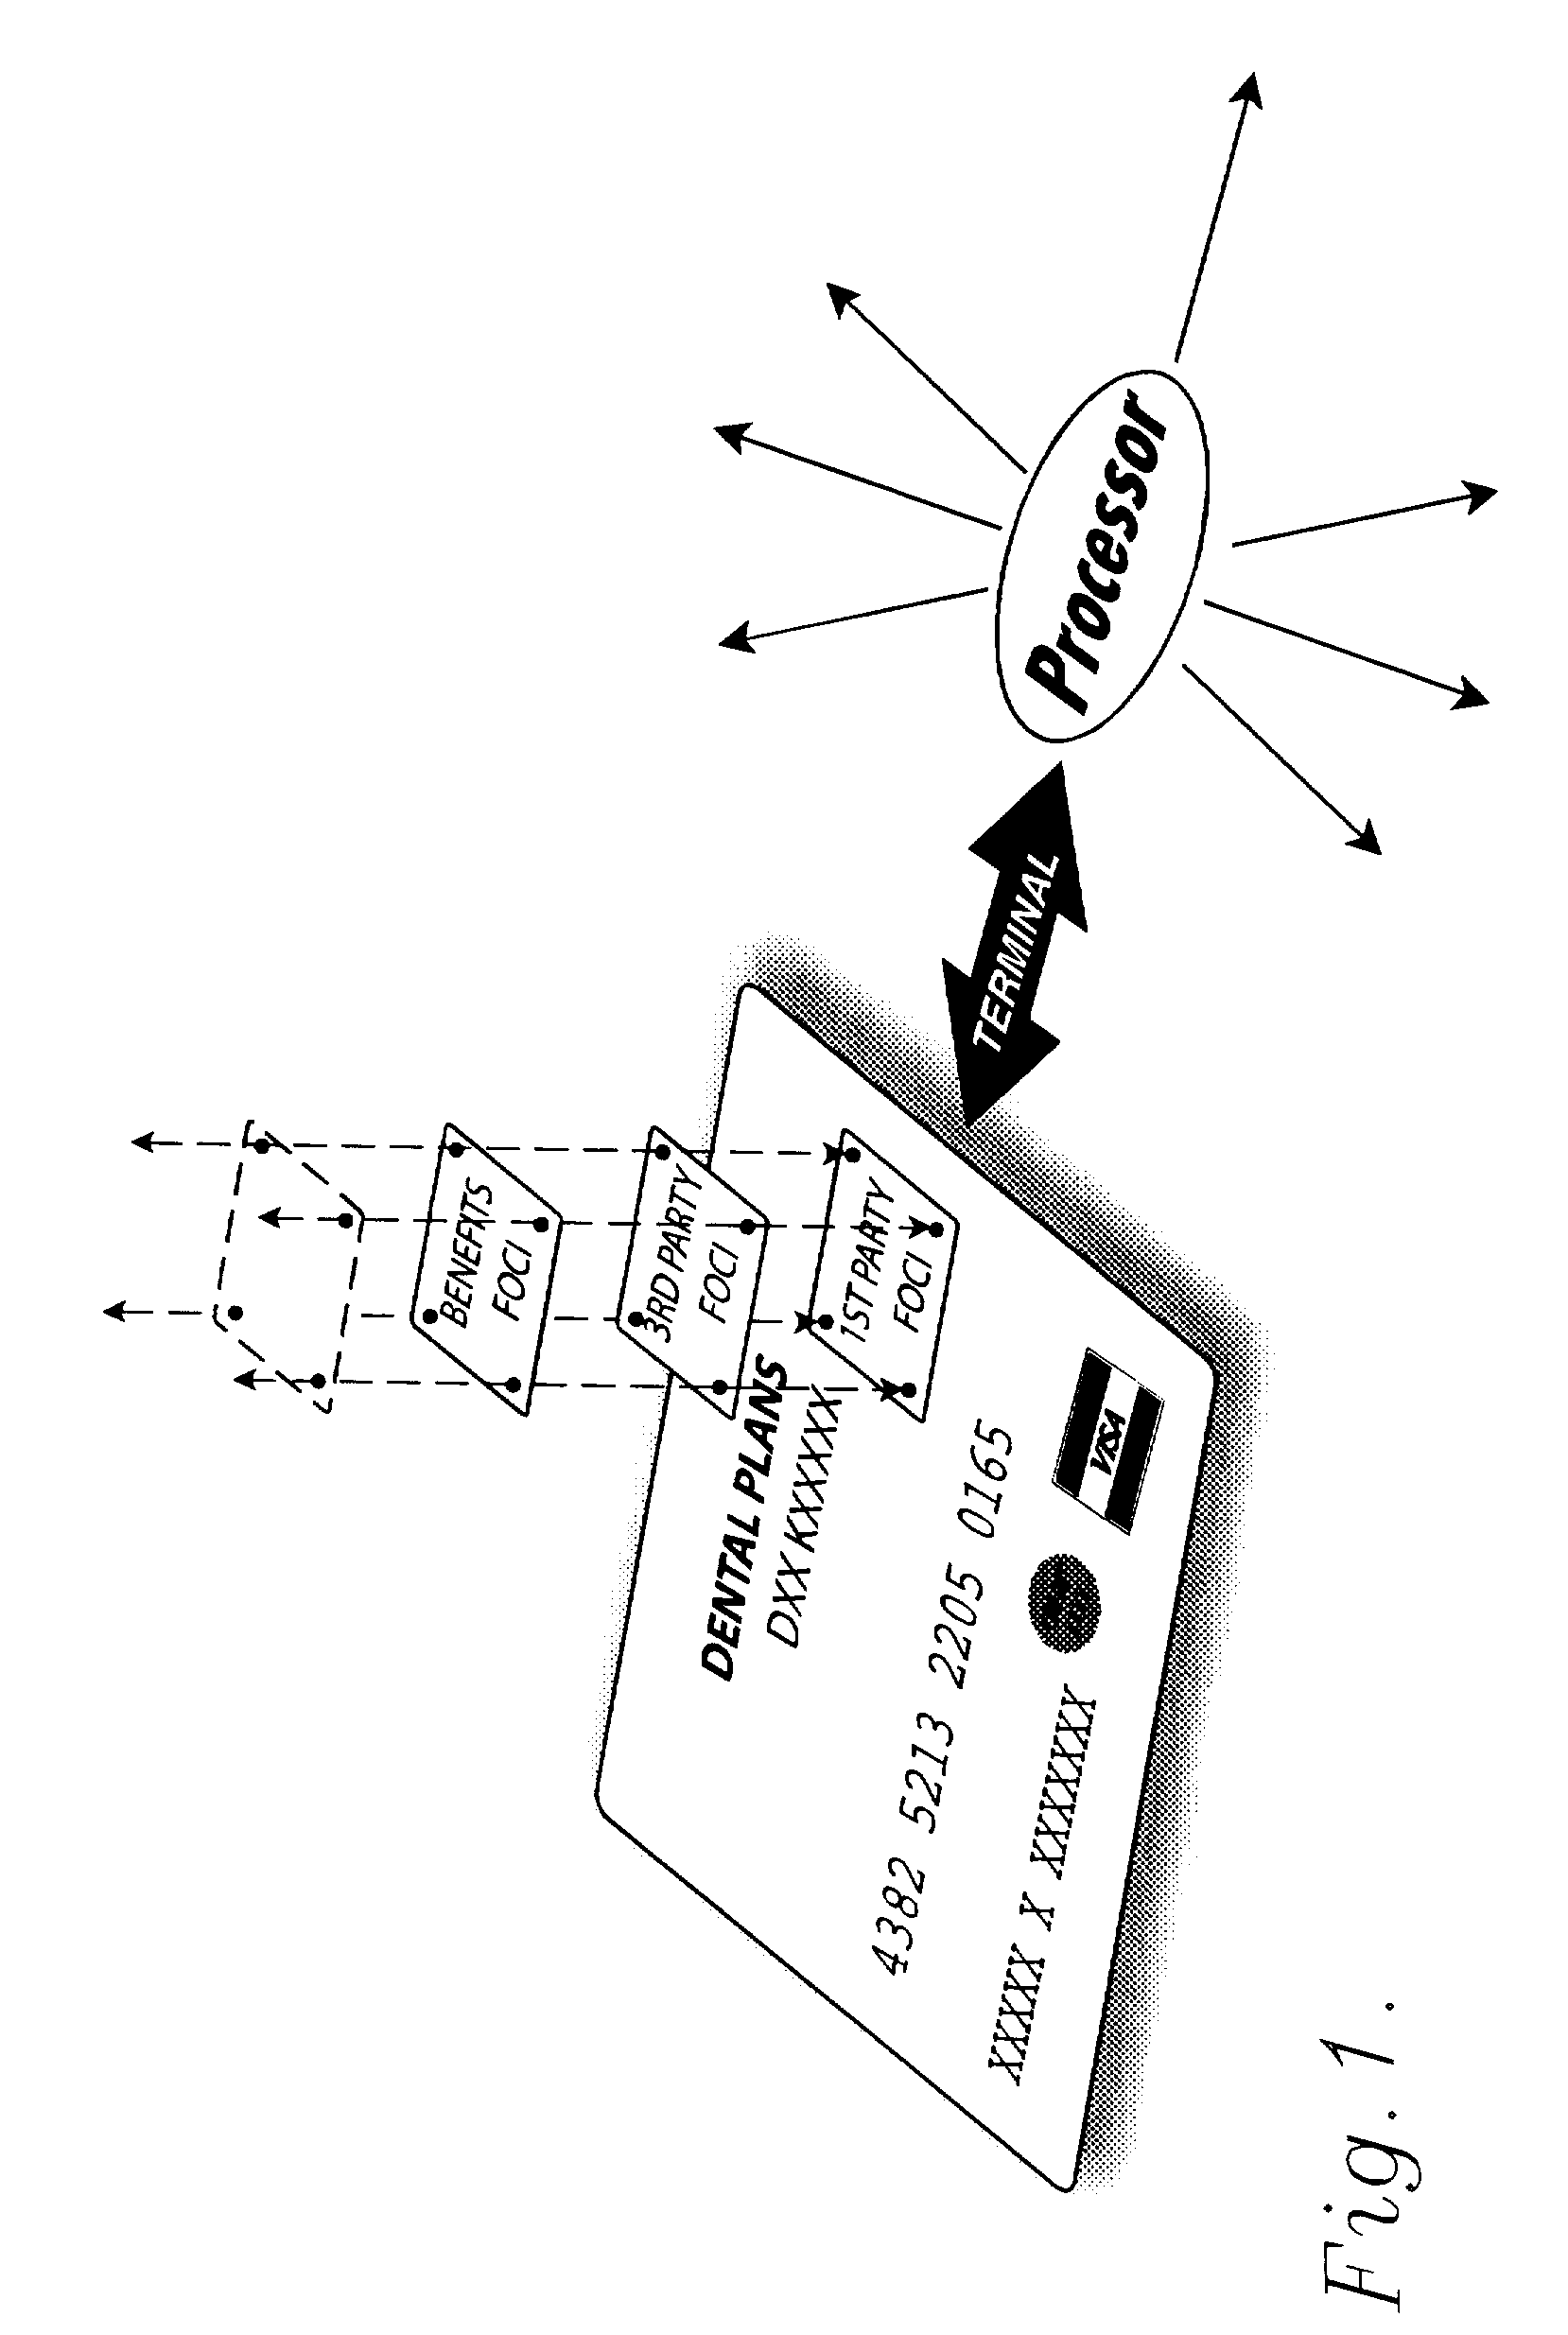 Payment convergence system and method